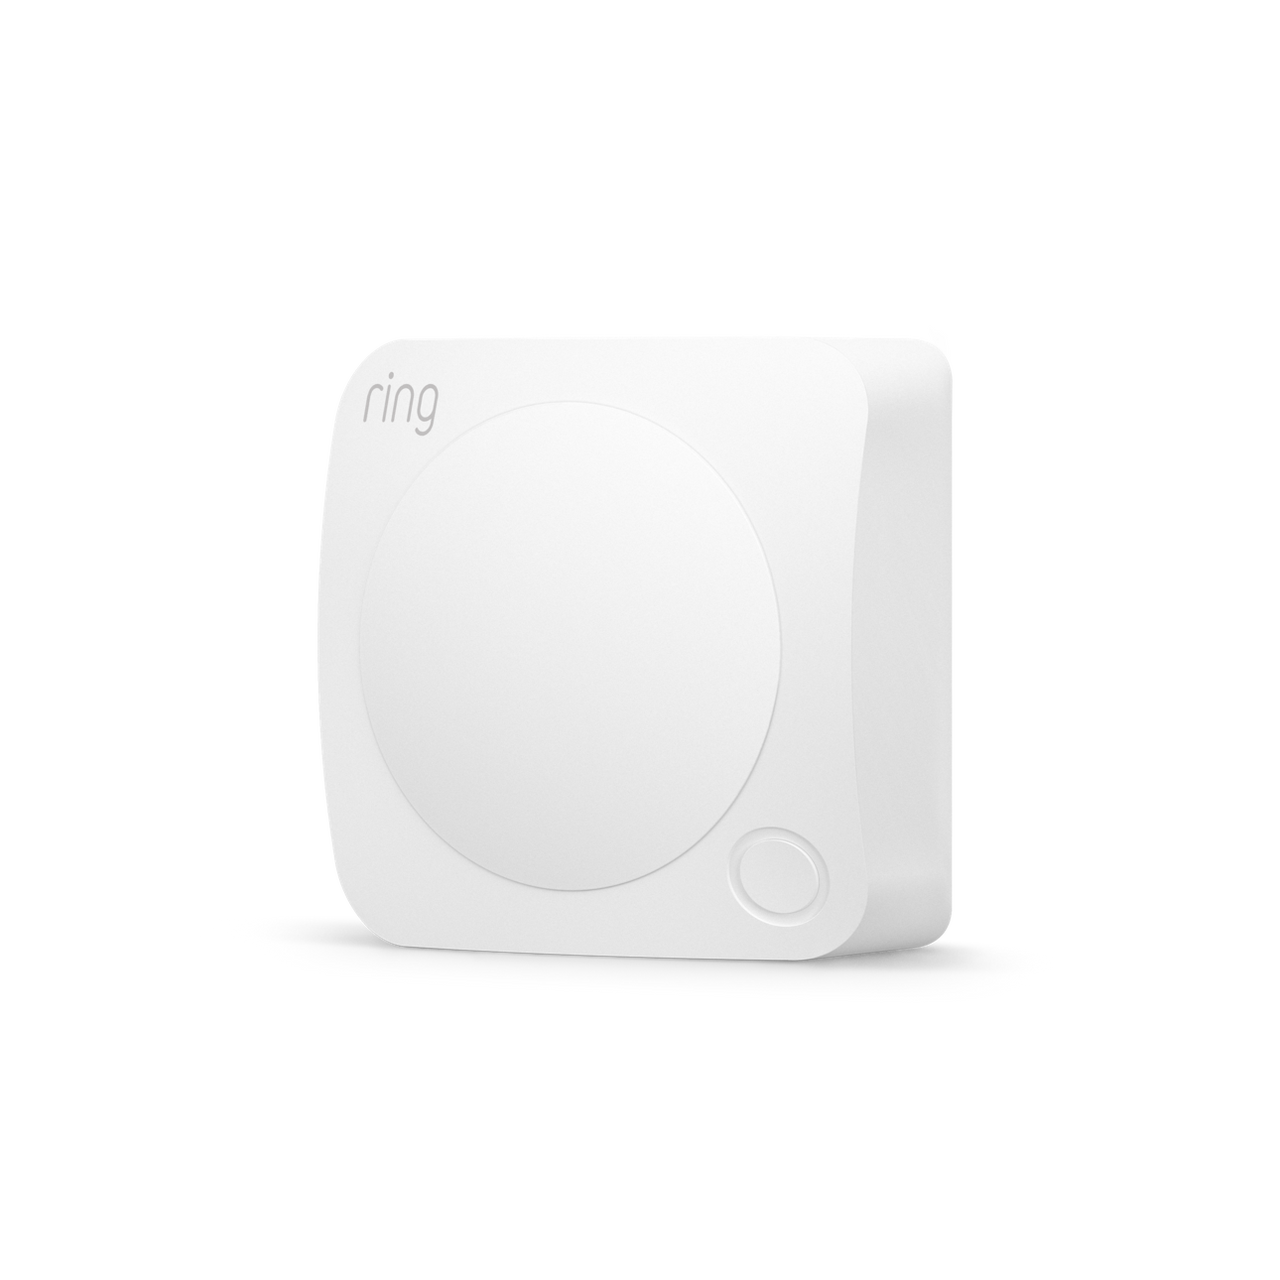 products/Alarm2.0-MotionDetector_angled_1290x1290_92034684-3afb-4c14-acb9-2a1044060354.png